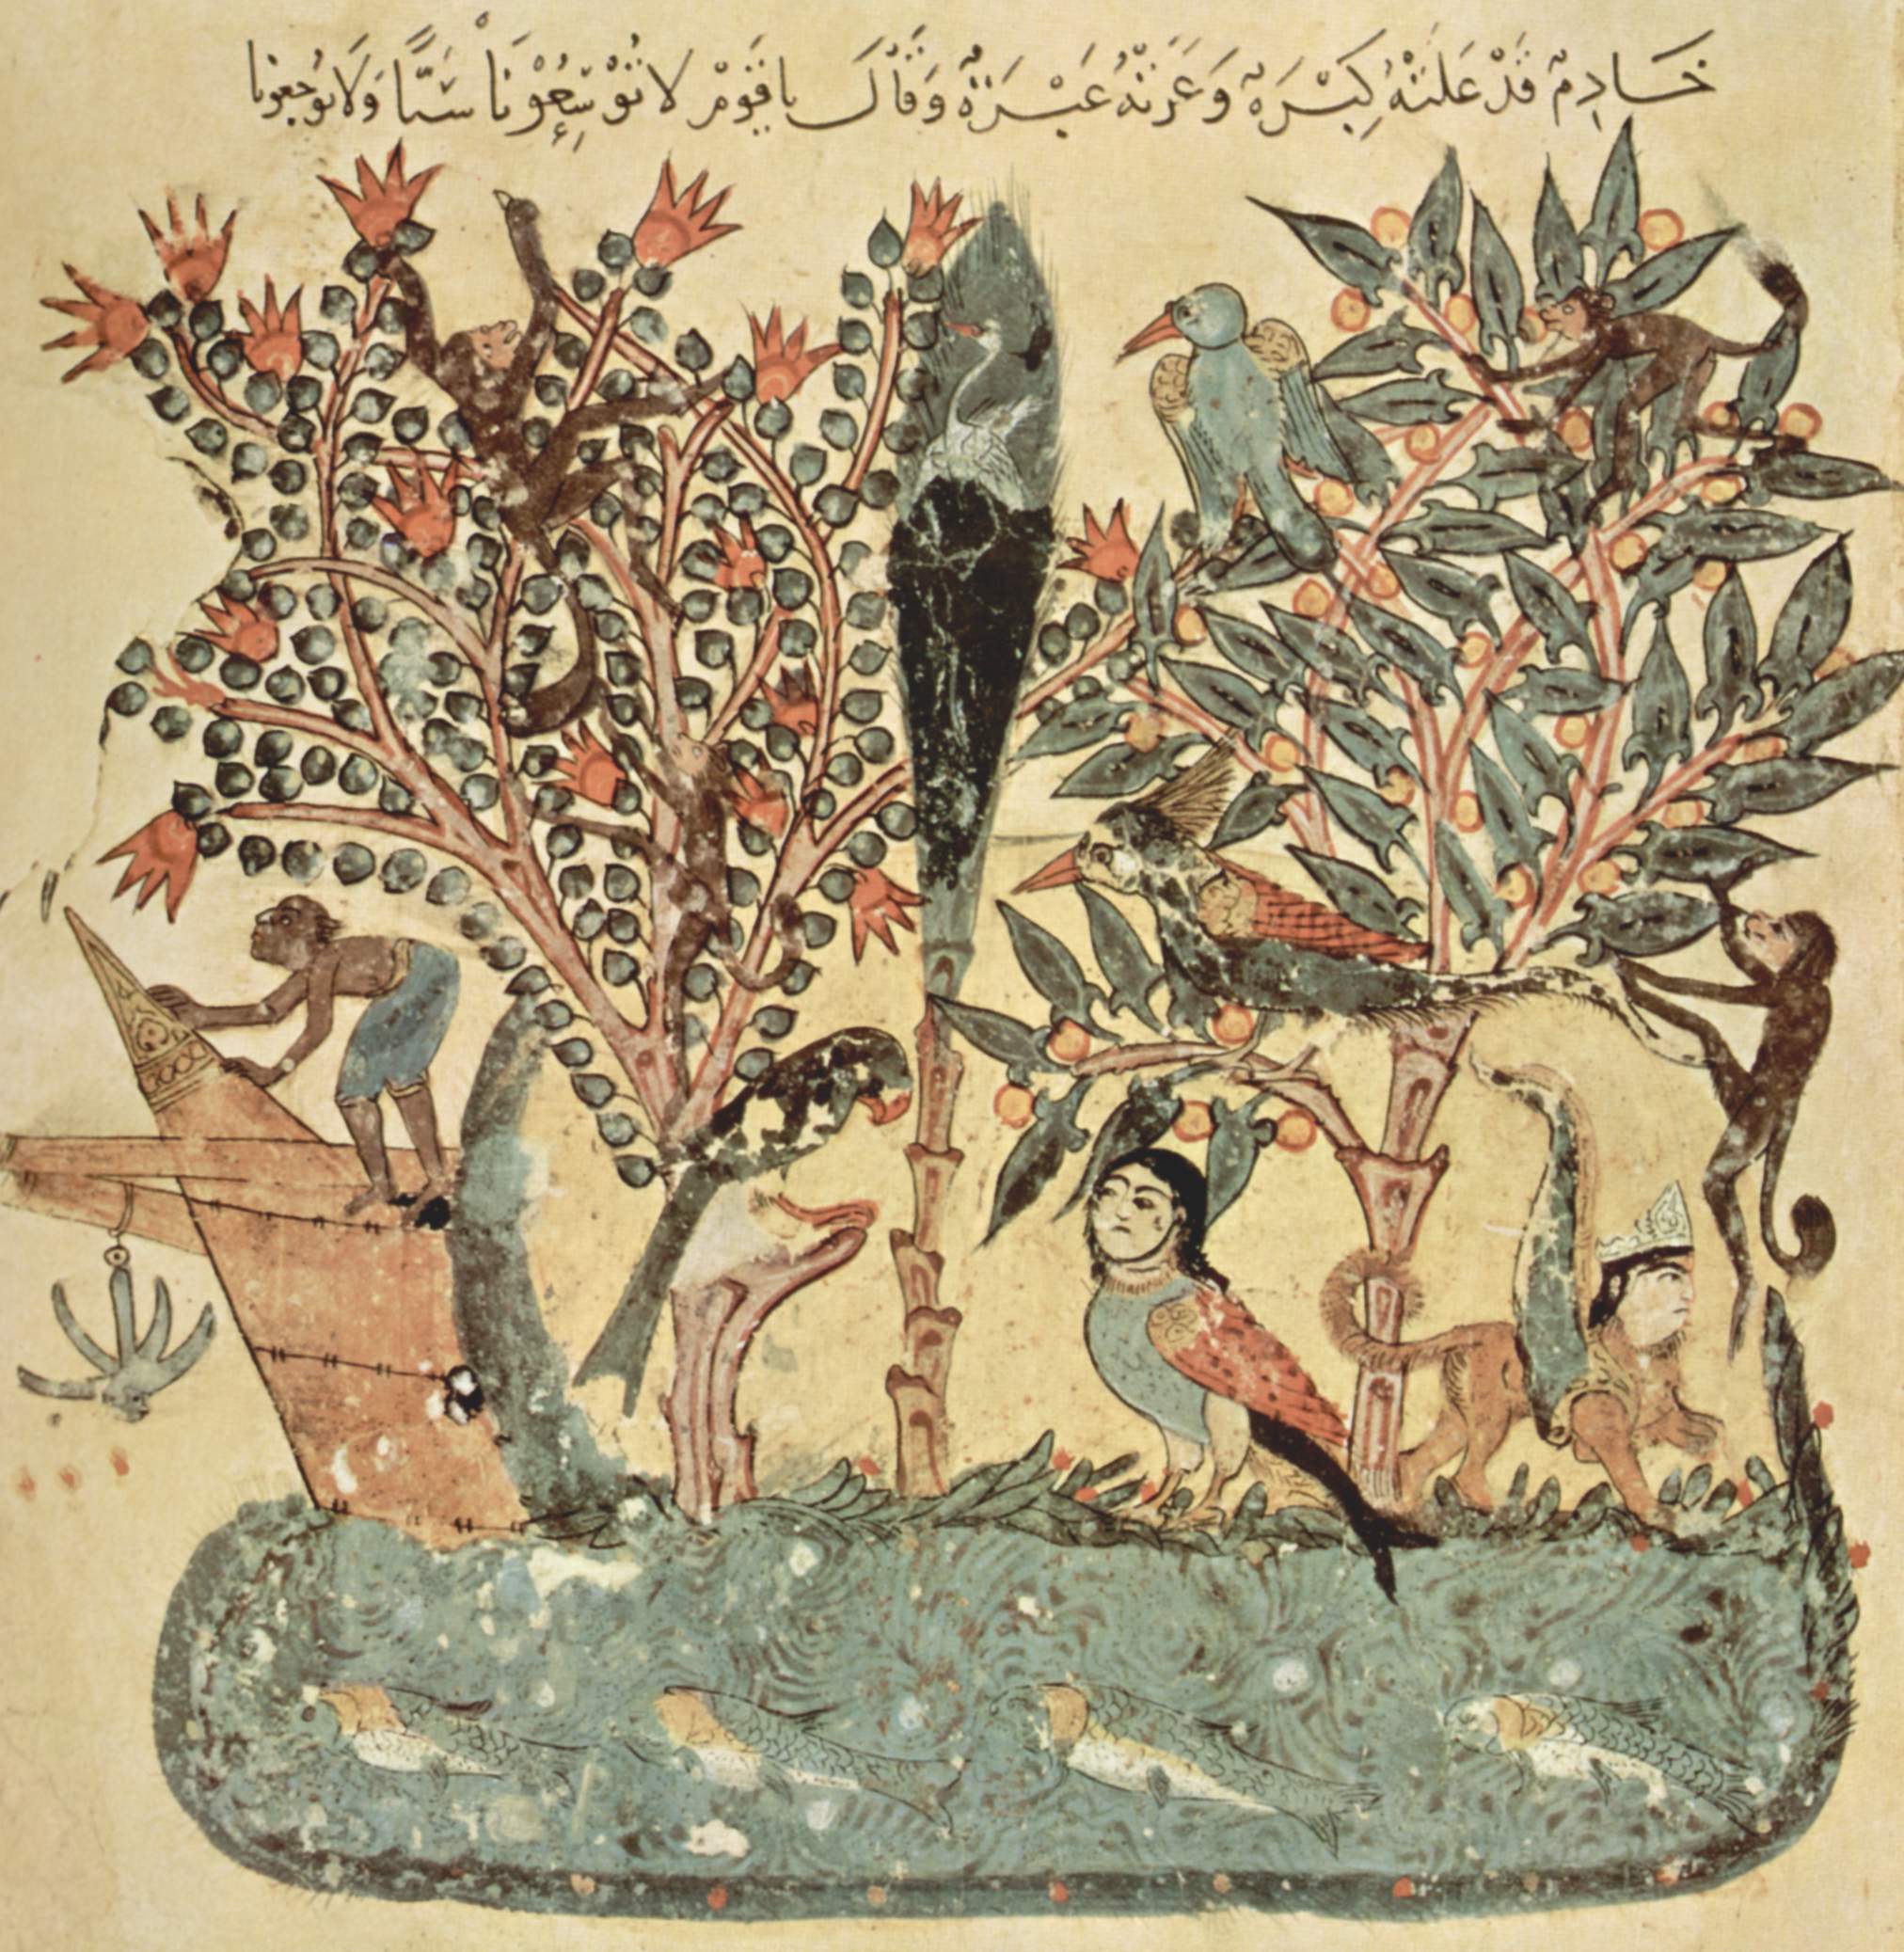 A scene depicts several birds and mythical creatures amongst blooming trees resting on a boat of vegetation.